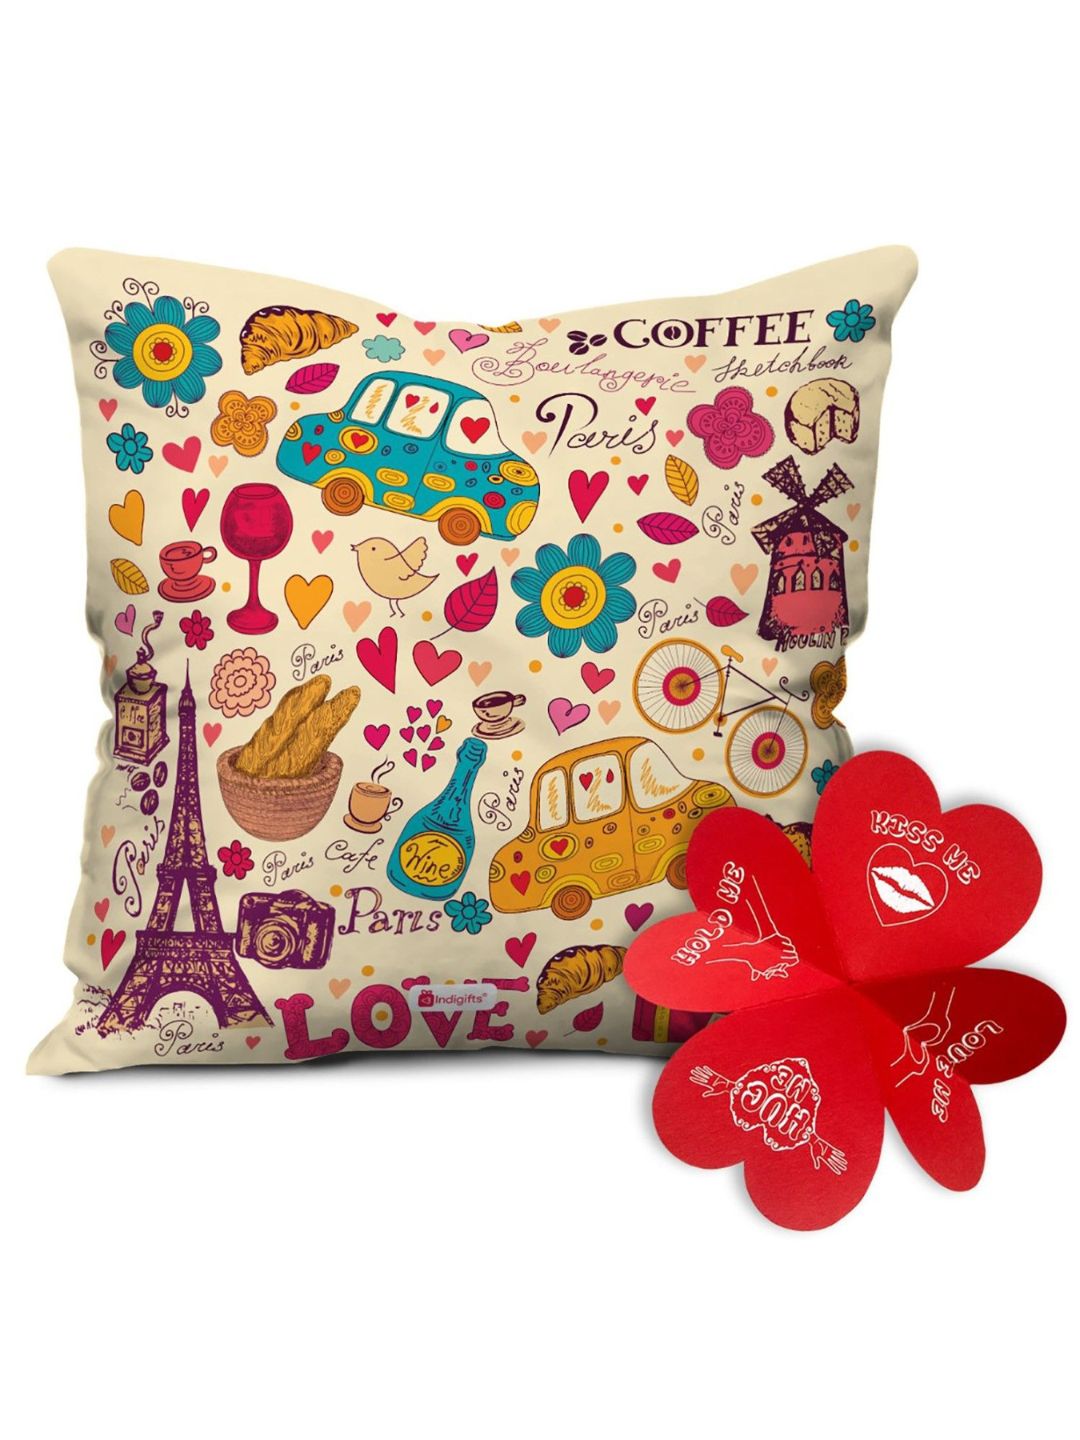 Indigifts Printed Cushion Cover with Filler | Paris Theme Print | Polysatin | 12×12 Inches | Comfortable Multicolor Cushions Soft Decorative Pillows | Unique Quirky Gifts | Valentine Gifts